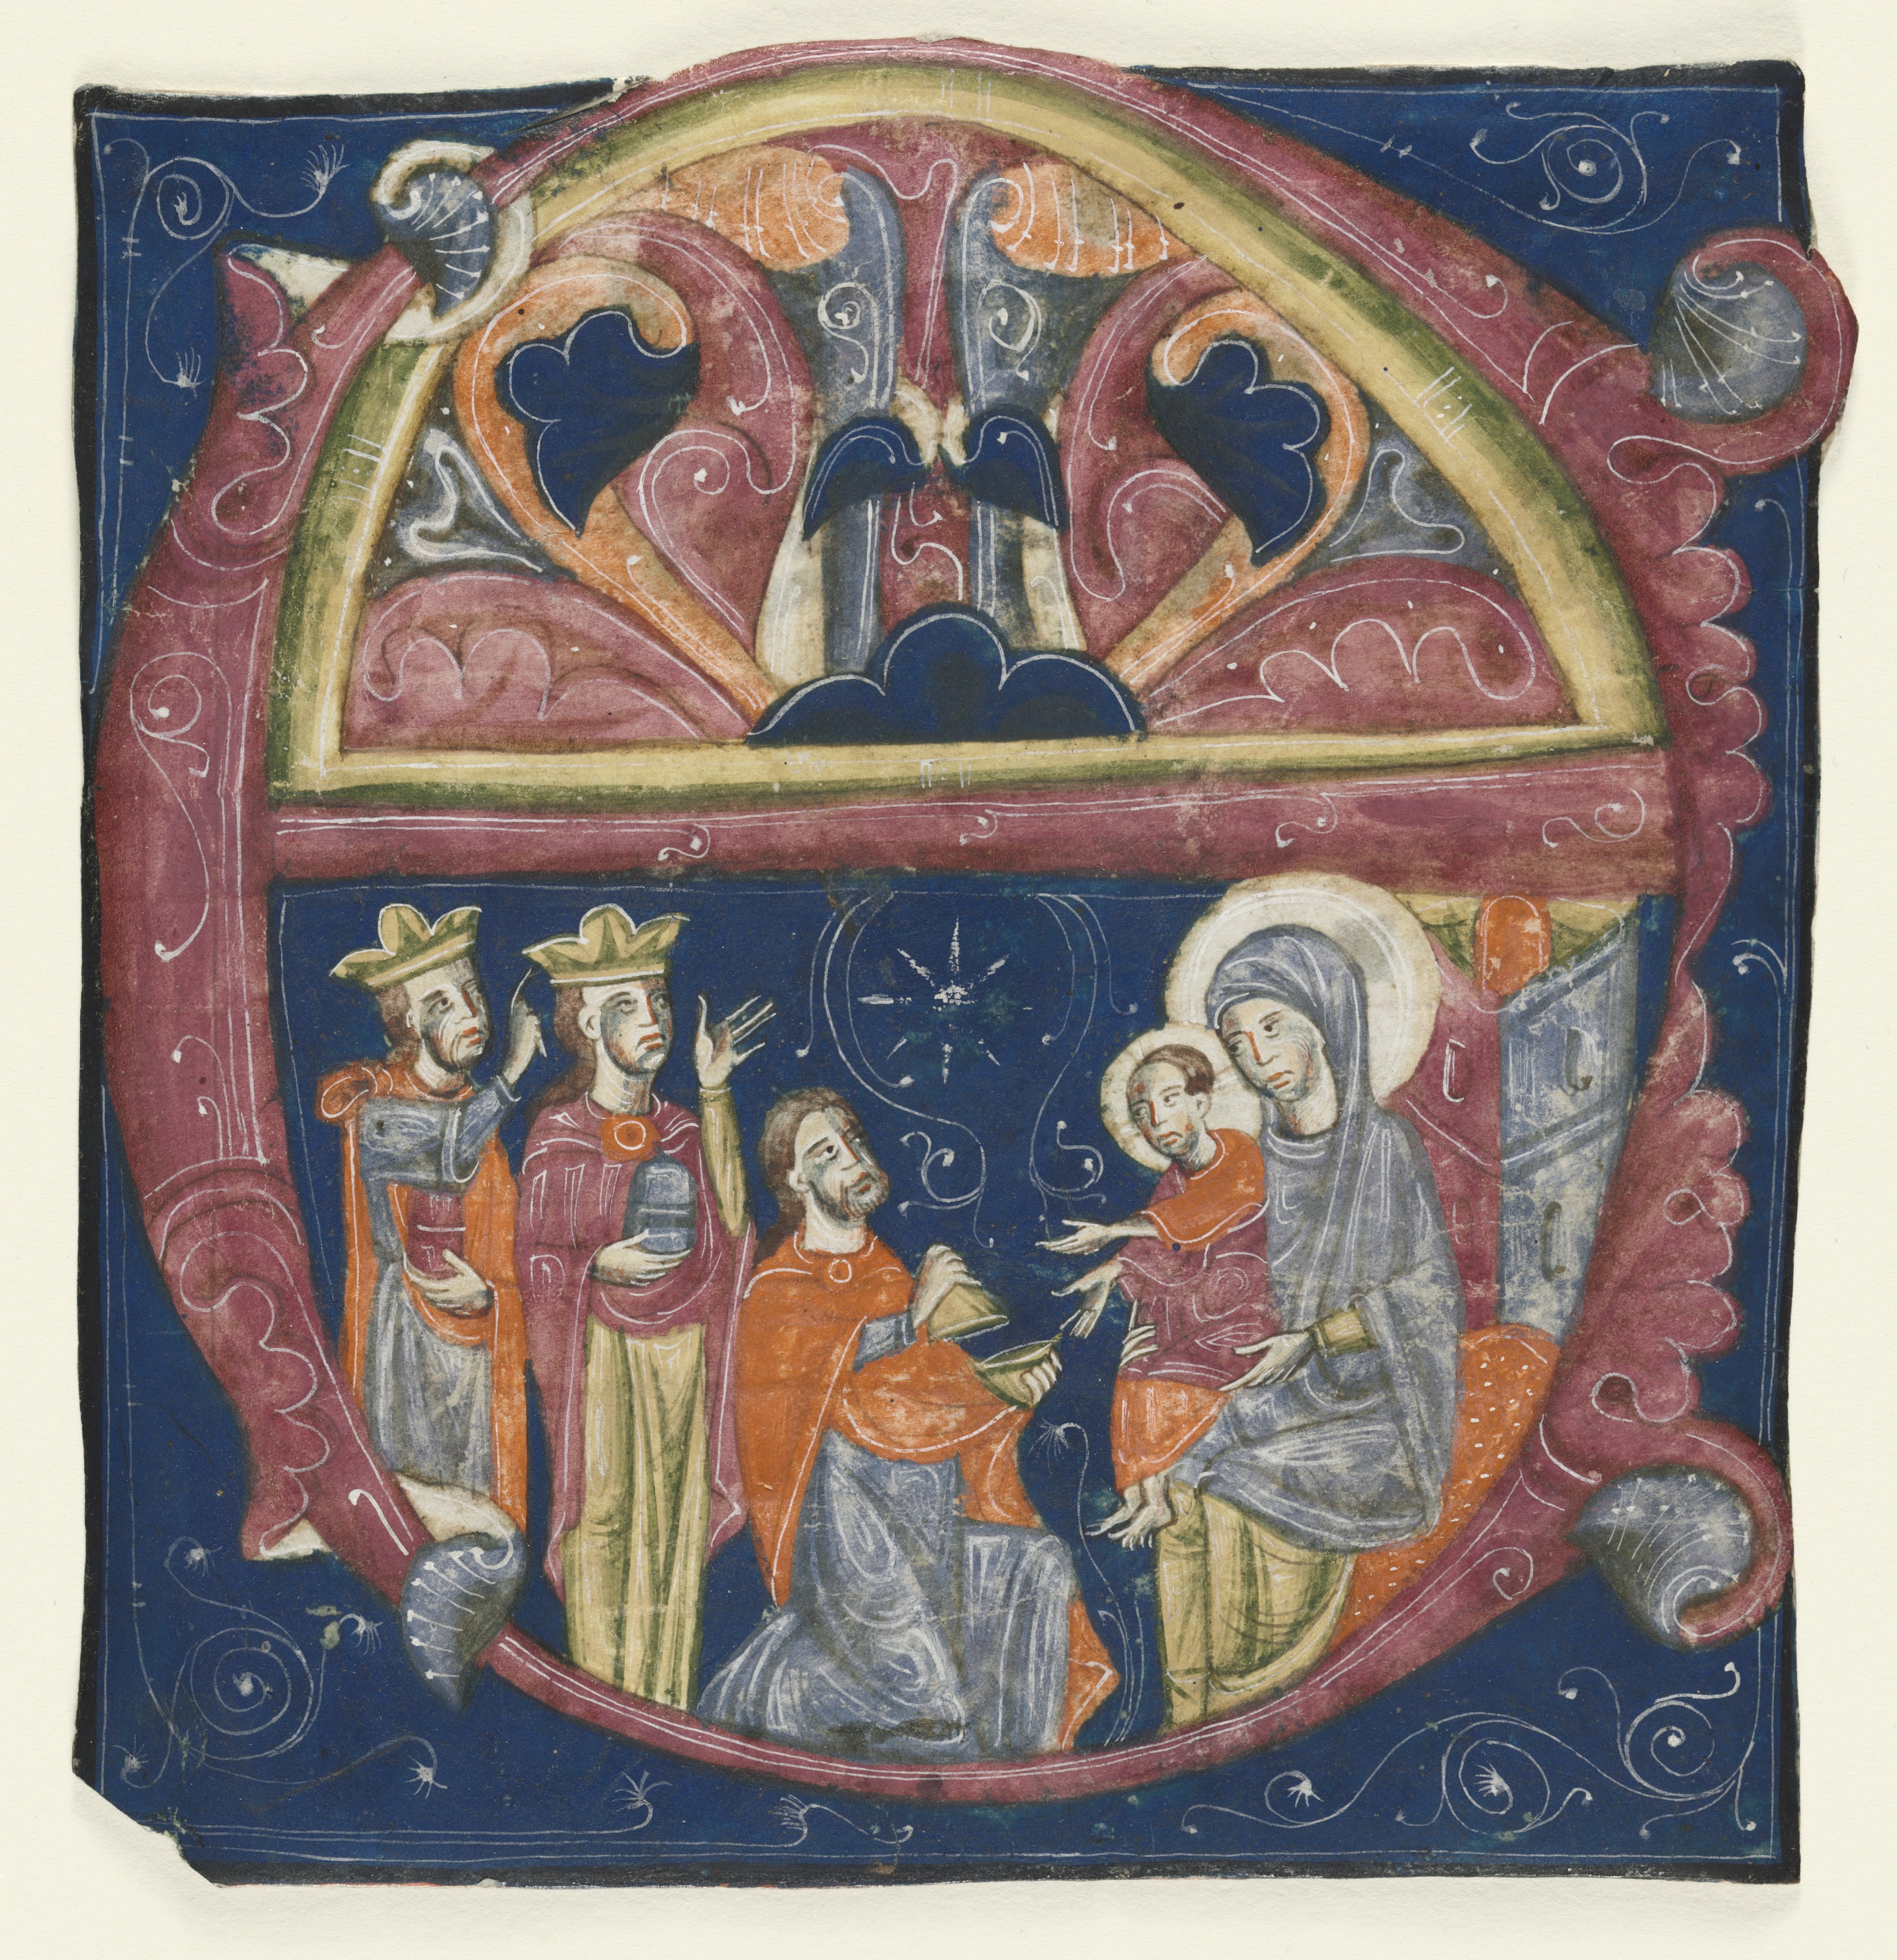 Historiated Initial (E) Excised from a Gradual: Adoration of the Magi